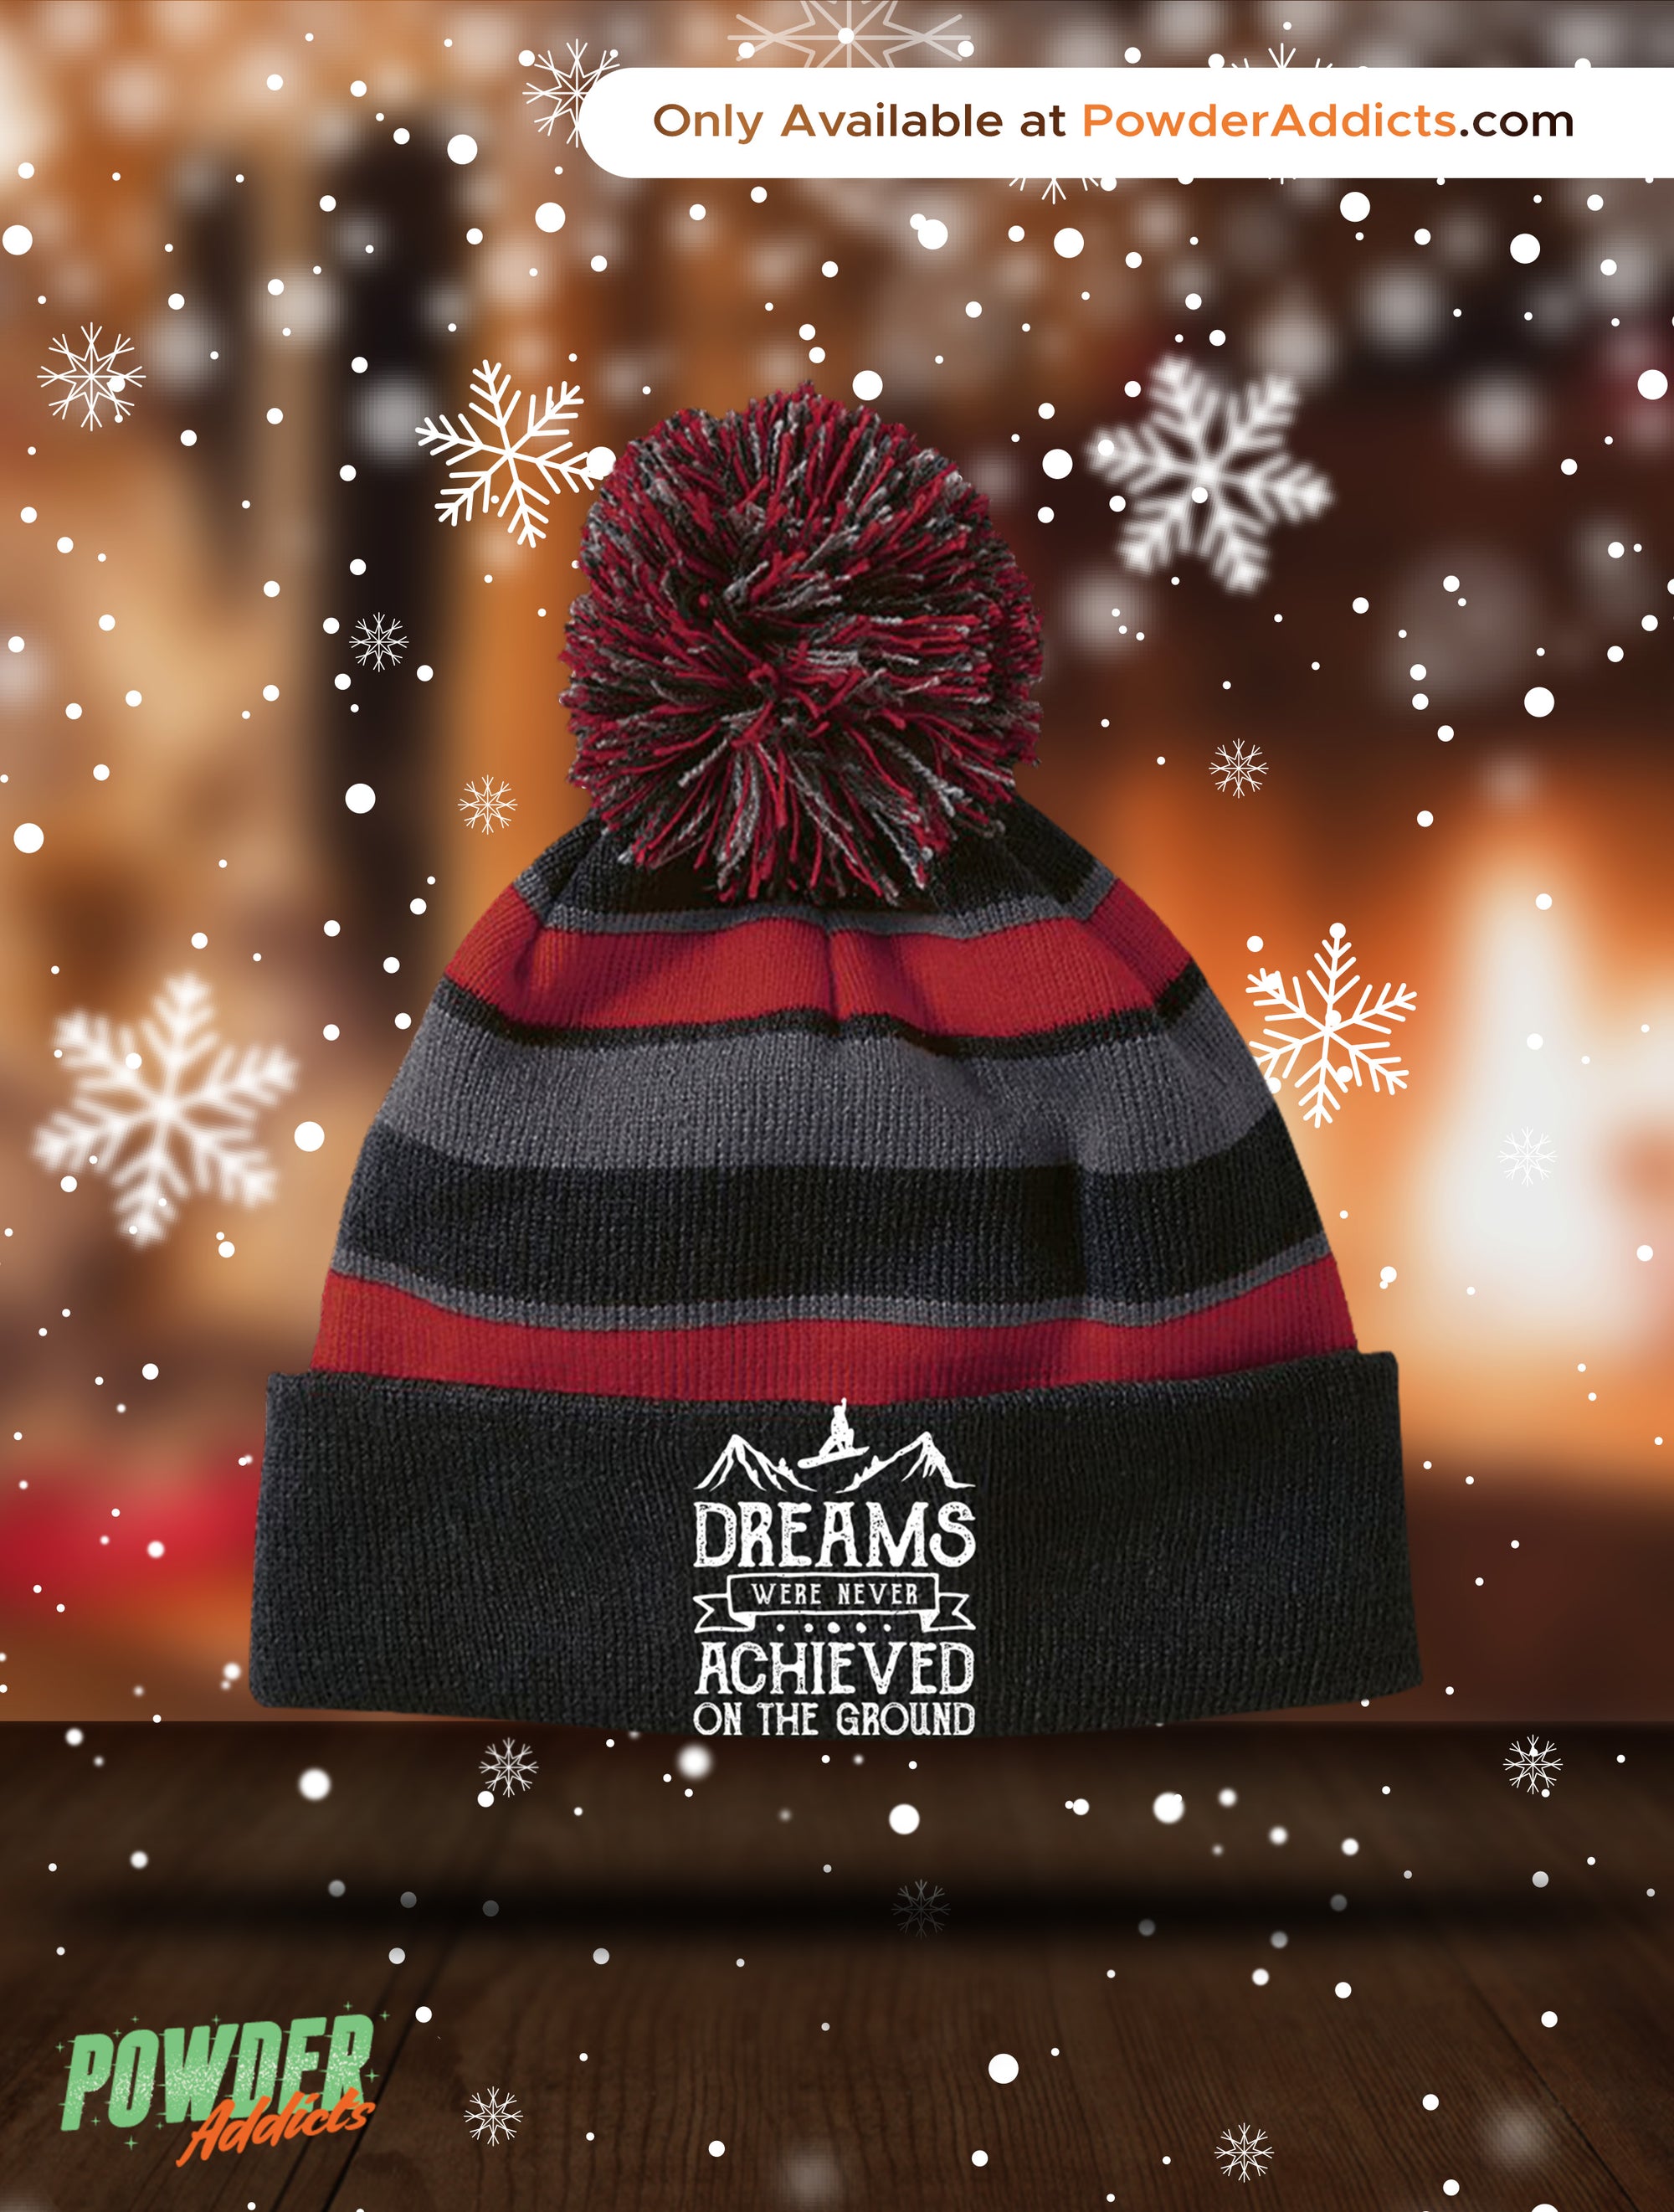 Dreams were Never Achieved on the Ground Striped Beanie - Powderaddicts